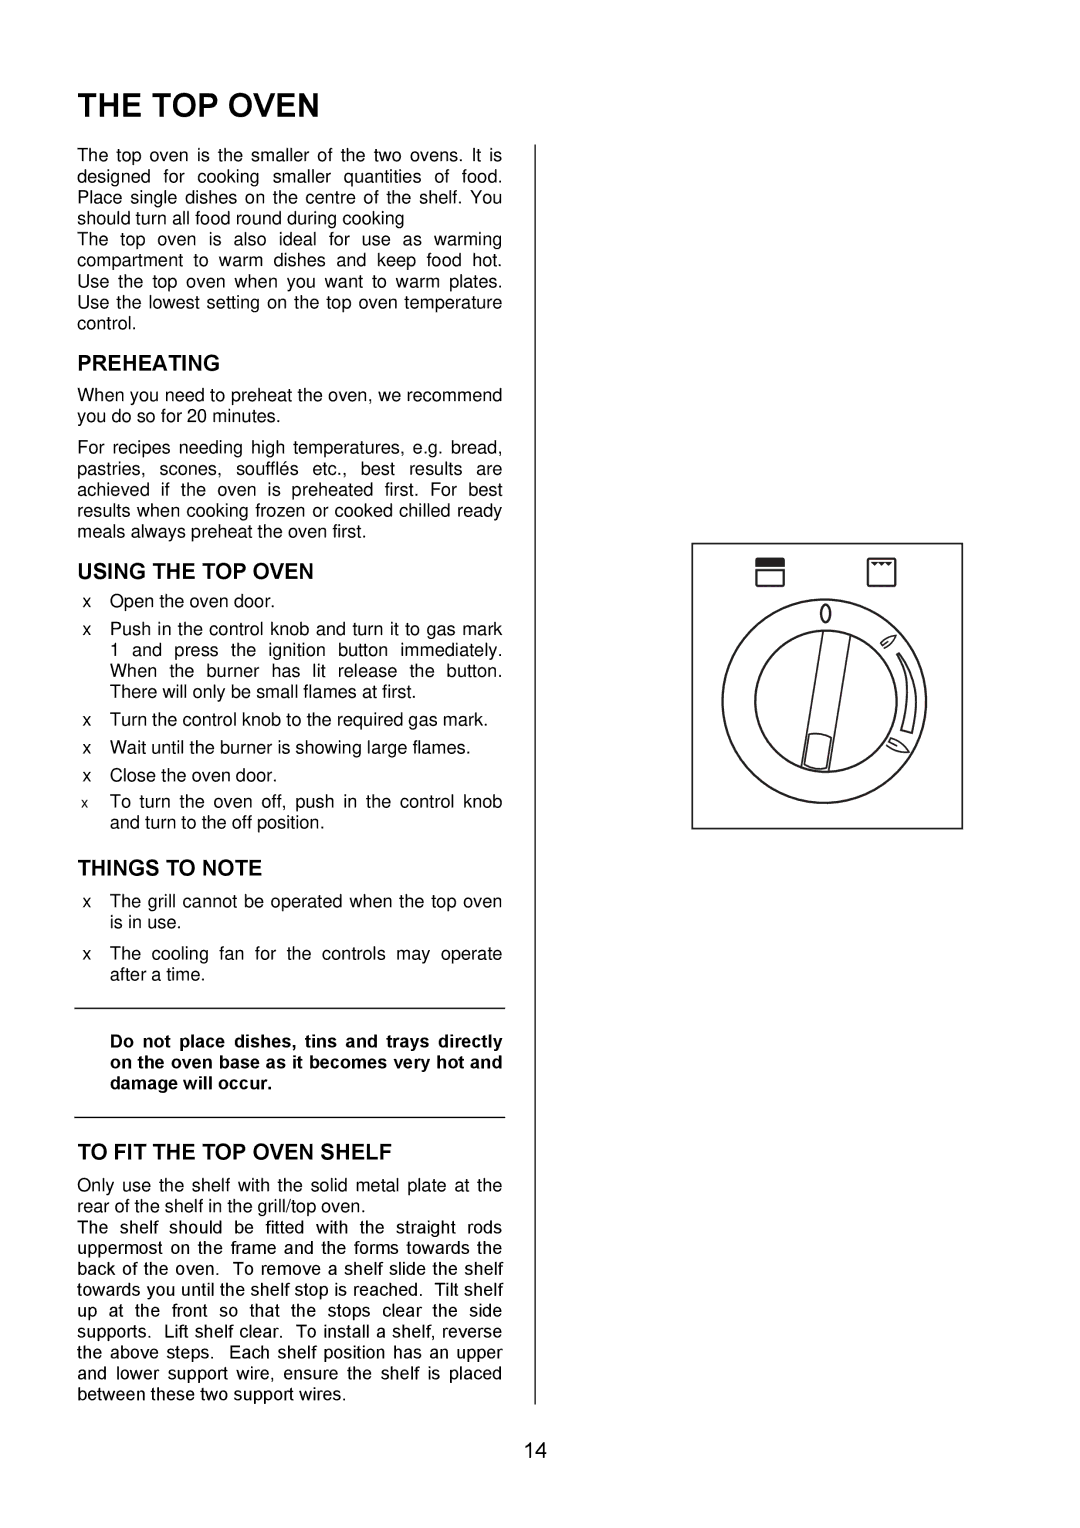 Electrolux EKG5546, EKG5547 user manual Preheating, Using the TOP Oven, To FIT the TOP Oven Shelf 